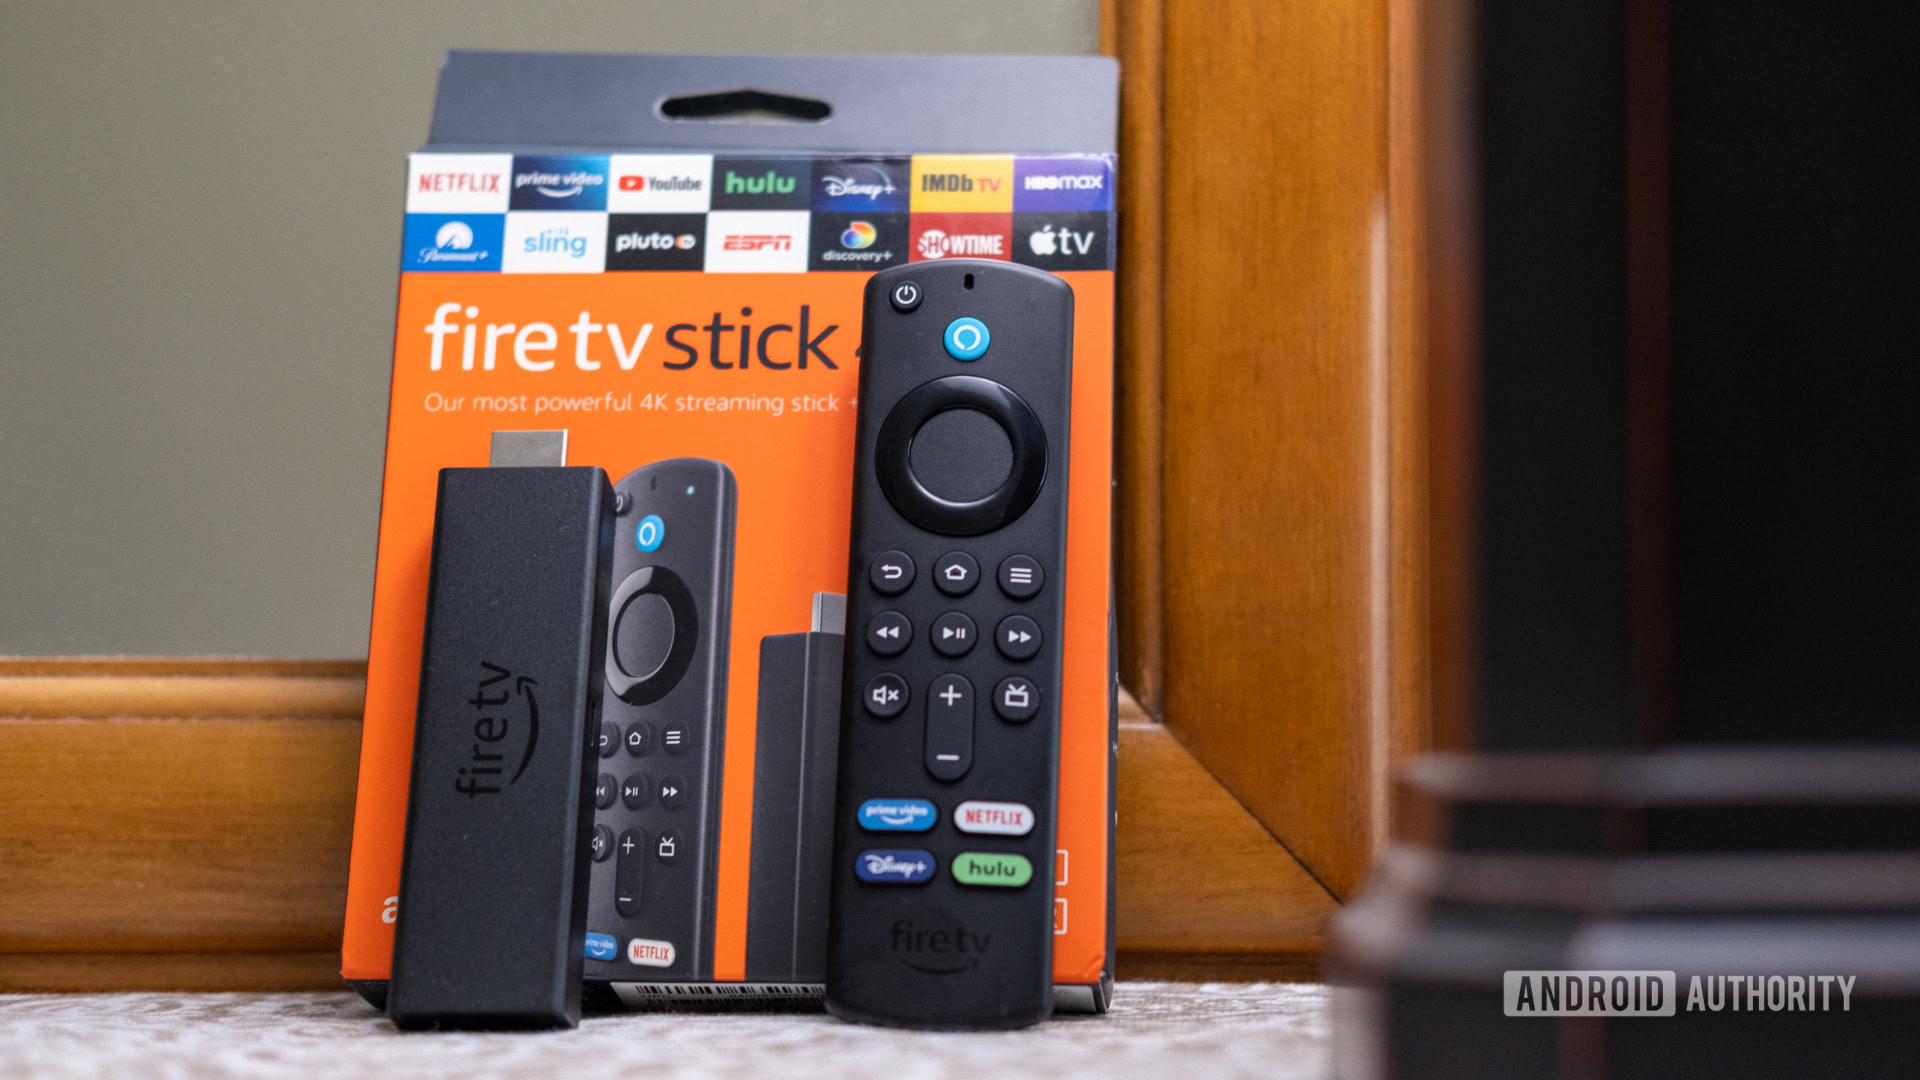 The Fire TV Stick 4K Max and remote leaning on the box